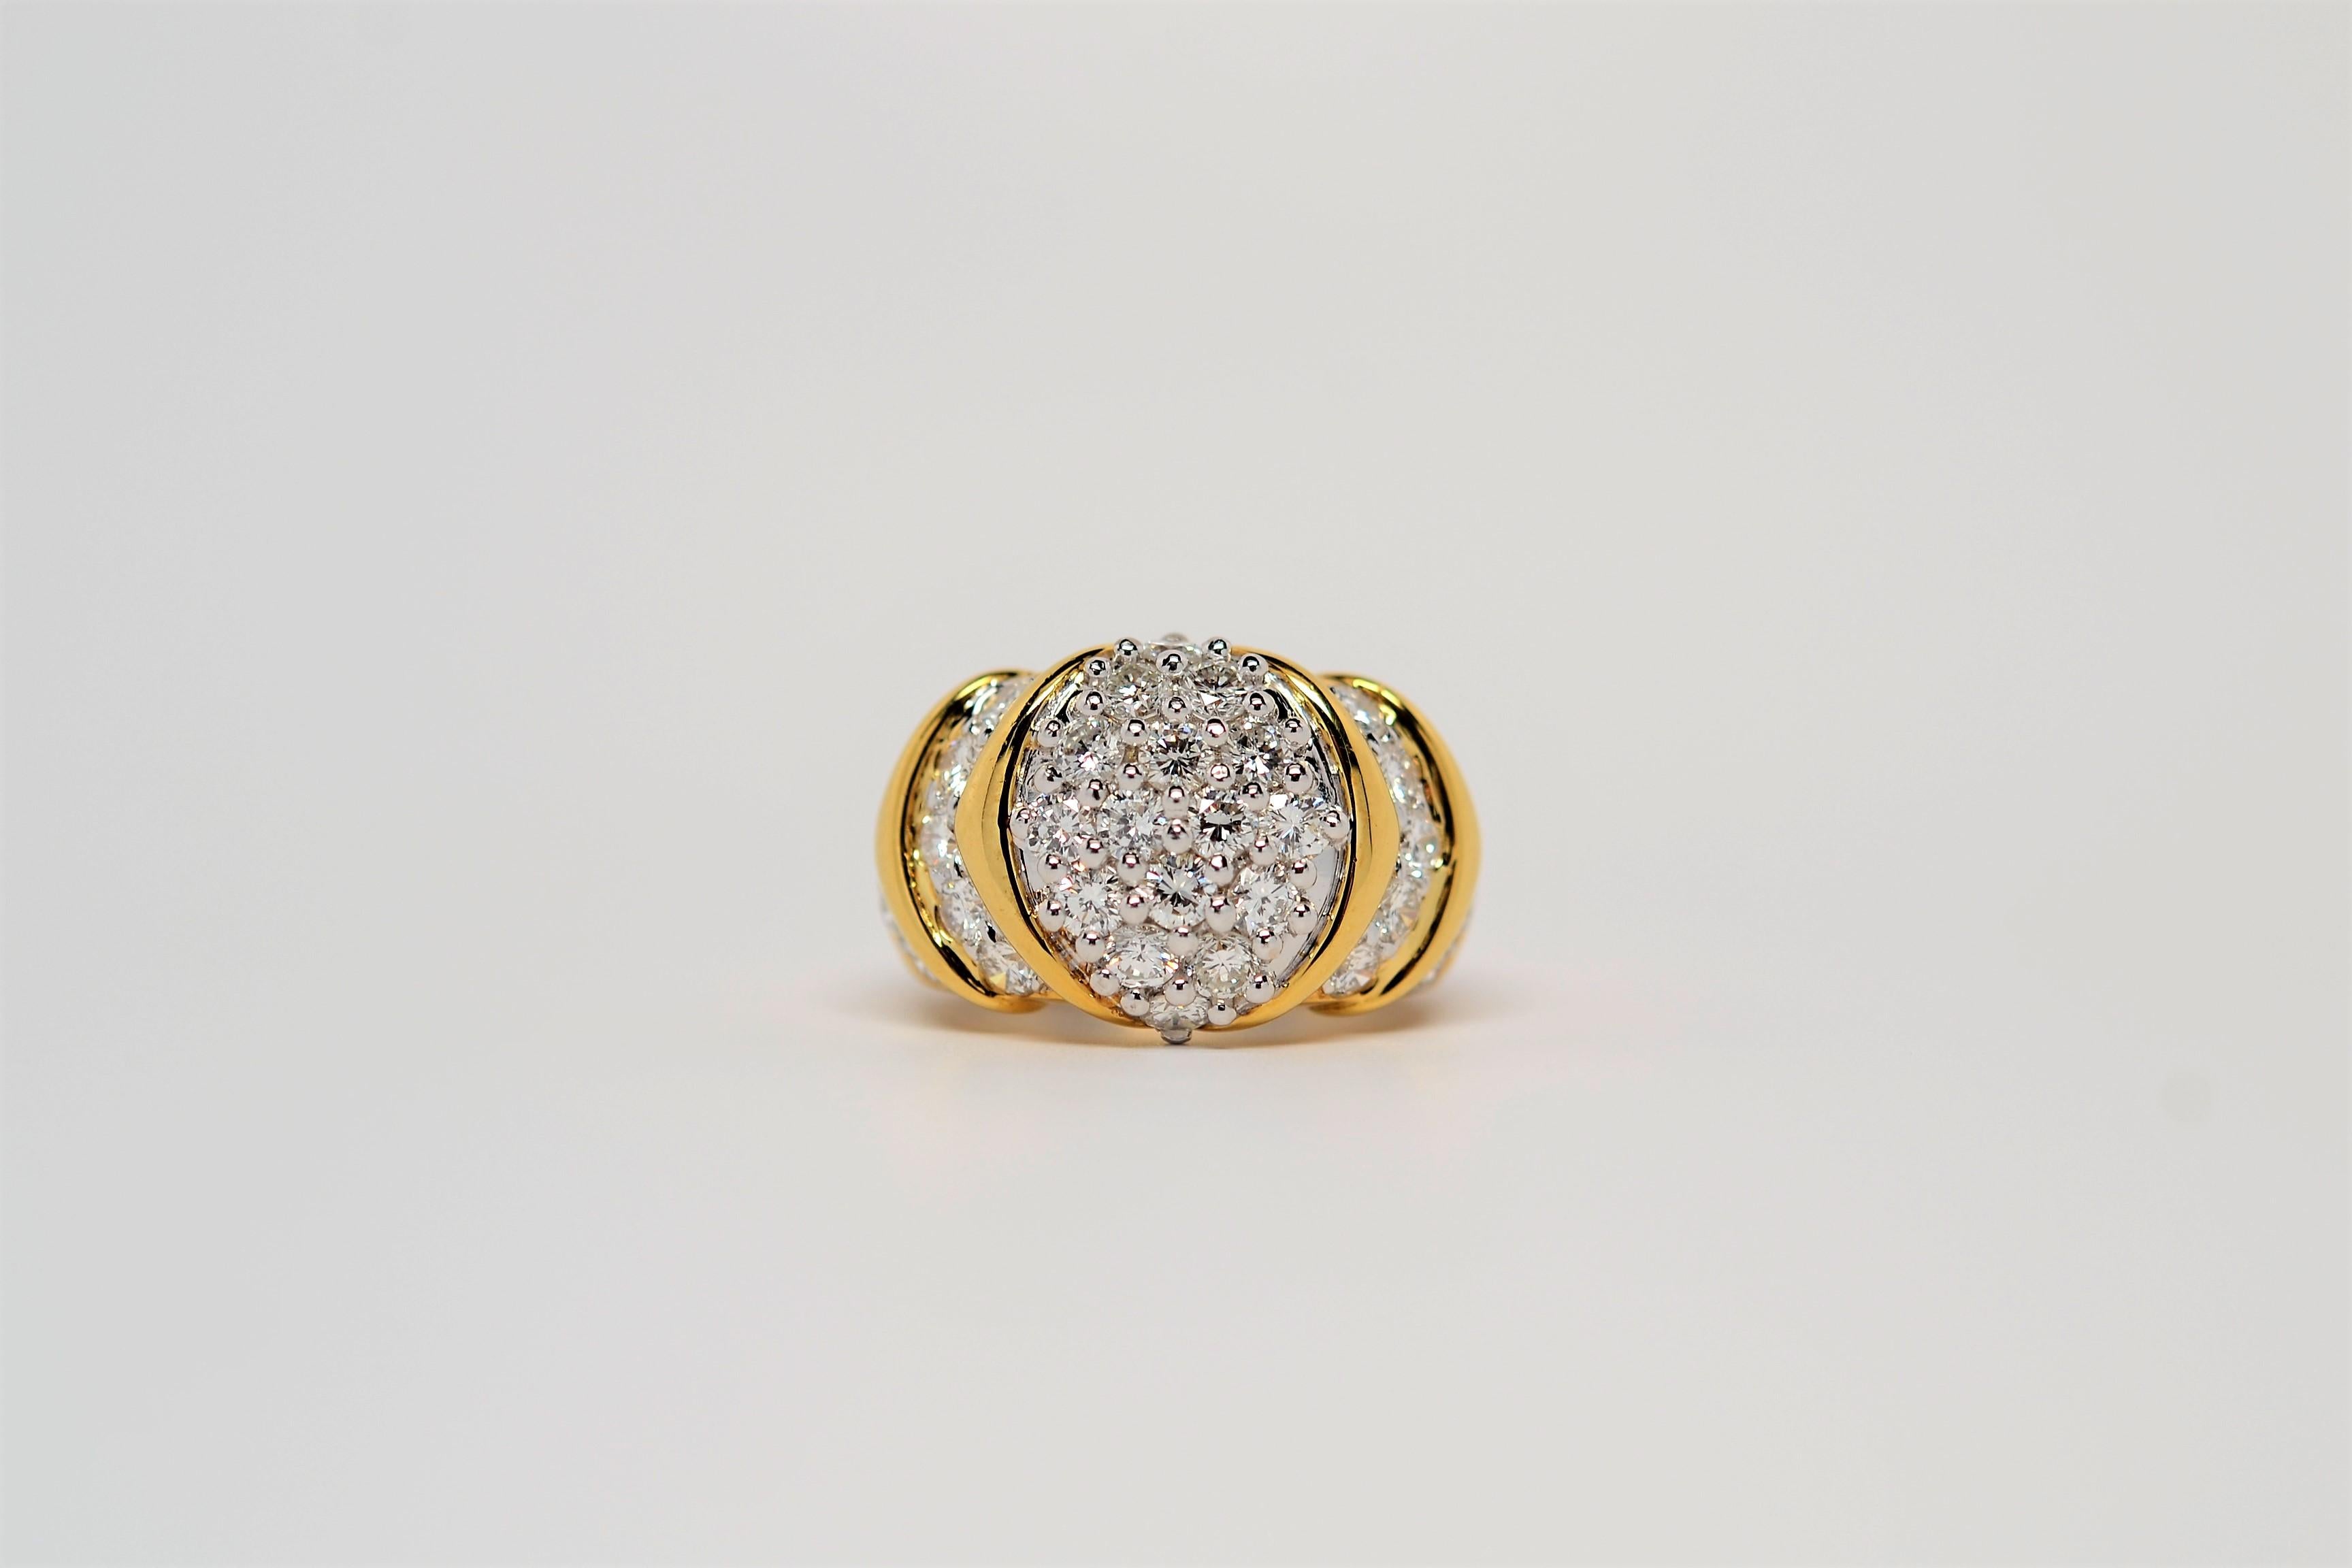 A large, statement ring with a two-tone gold layout set in 18K. The ring is made with an 18K Yellow Gold shank and 18K White Gold custom baskets and shared prongs to set the diamonds. 
Thirty six Round Brilliant Cut Diamonds weigh 2.89ct. Diamond